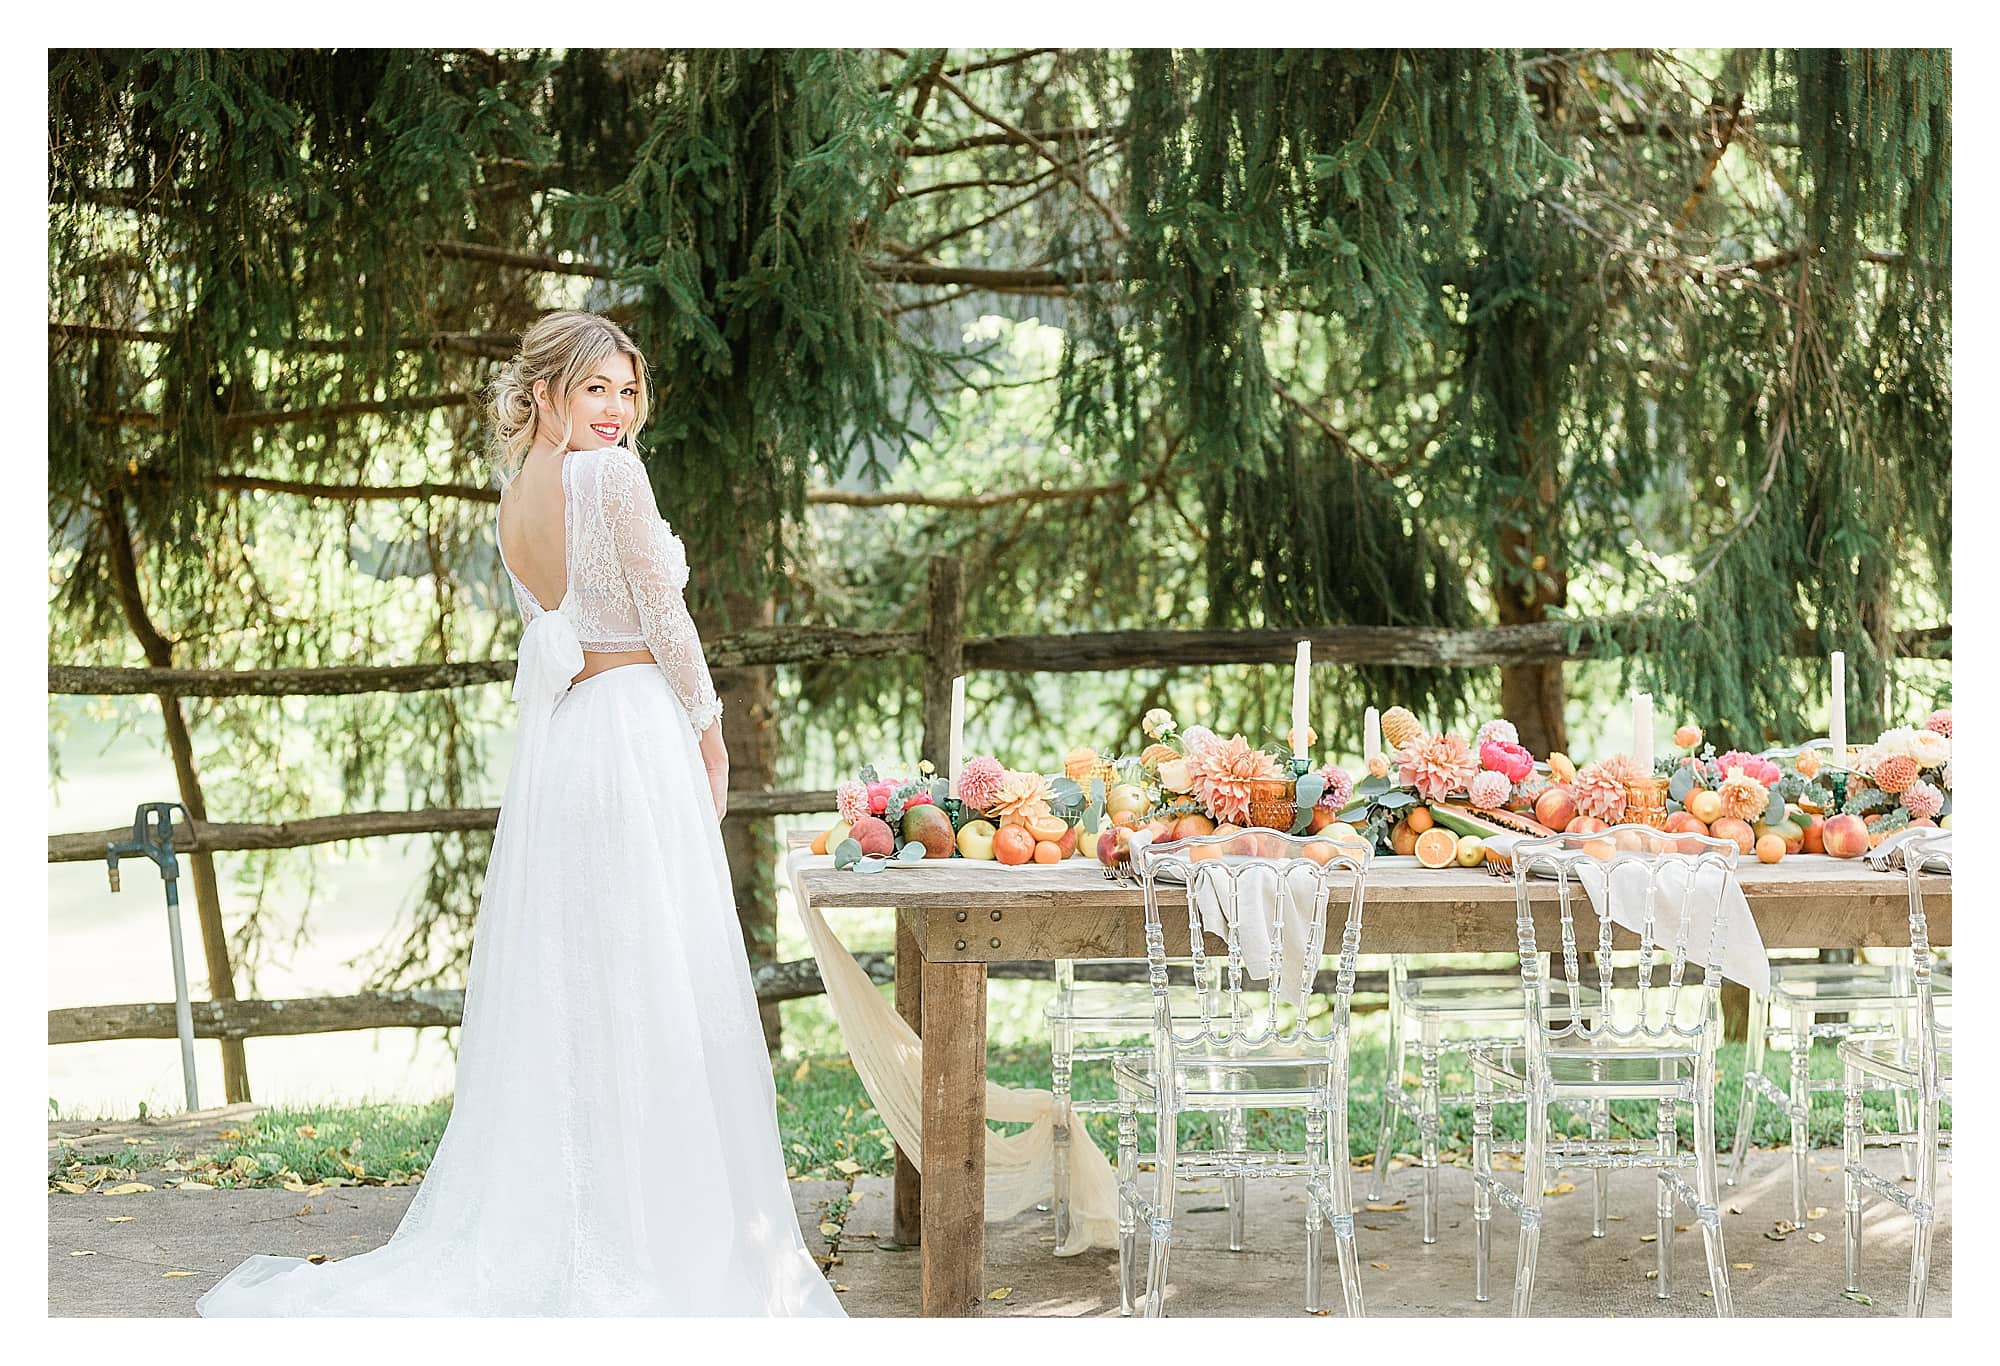 Rustic wooden table and clear plastic chairs with peach, pink and yellow citrus fruits as centrepiece down center of table with white candles with bride in white two piece lace gown standing beside smiling